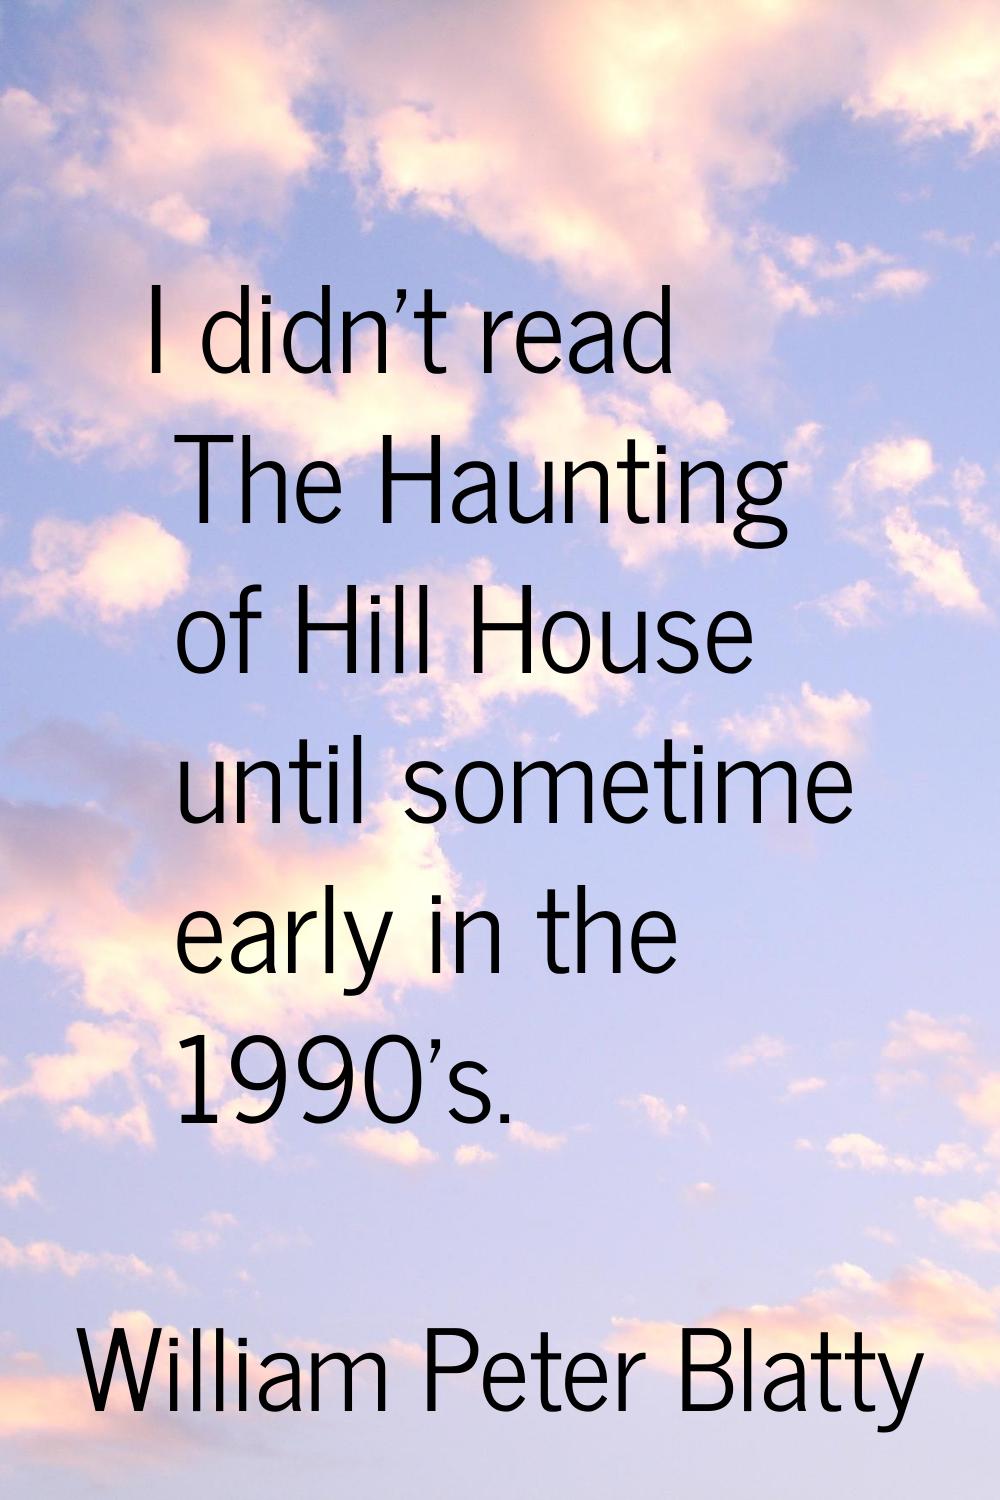 I didn't read The Haunting of Hill House until sometime early in the 1990's.